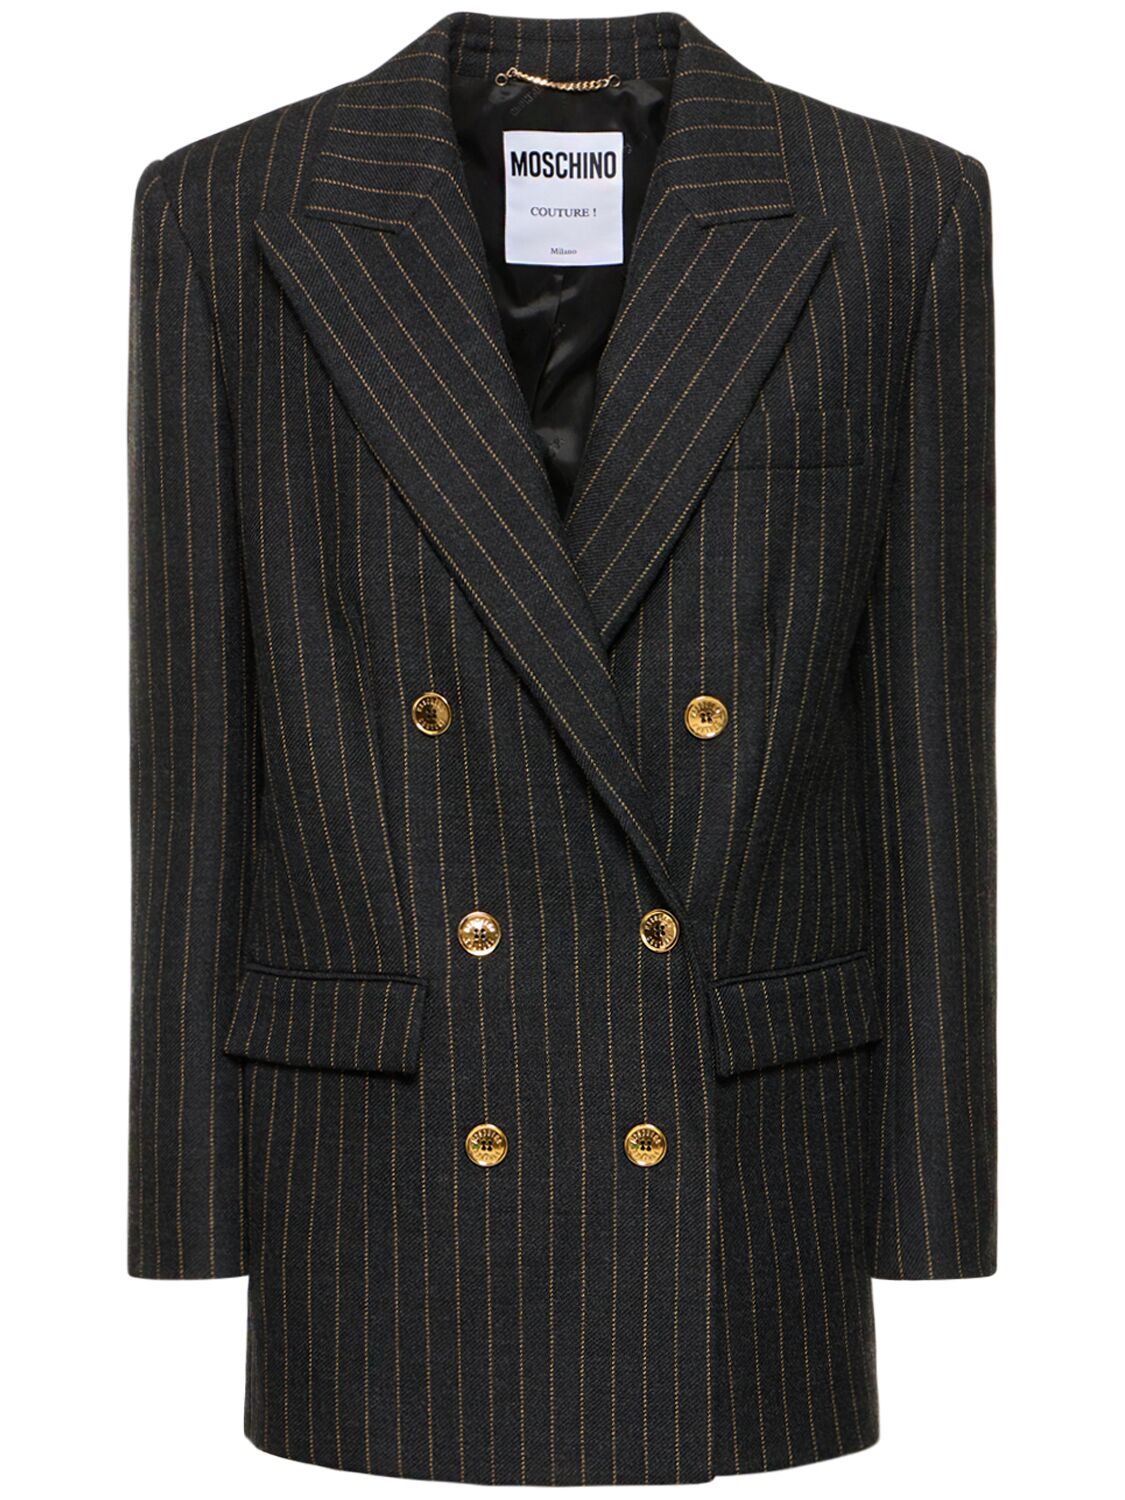 MOSCHINO PINSTRIPED DOUBLE BREASTED WOOL JACKET